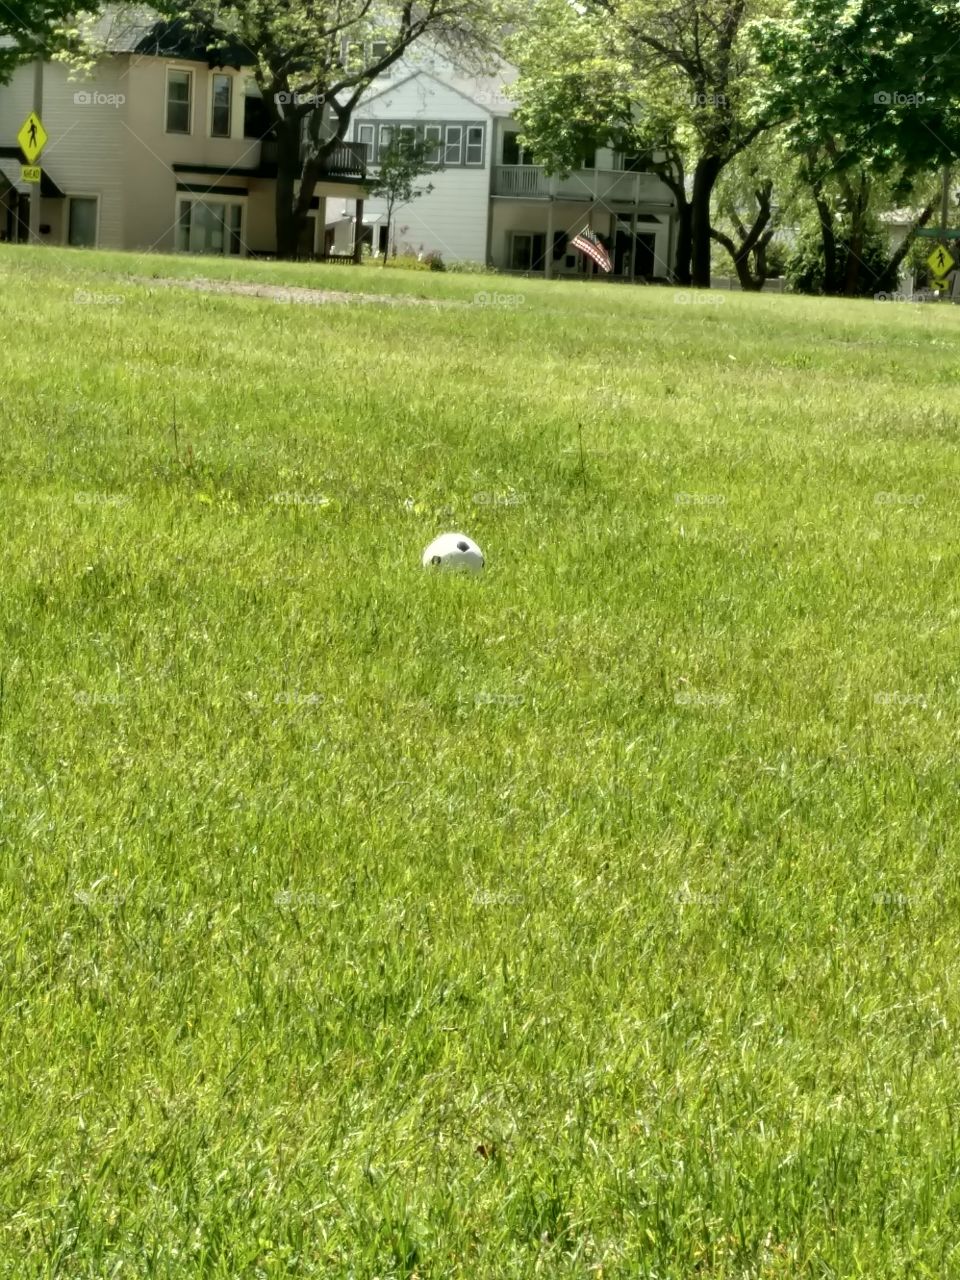 Lonely Soccer Ball Not Being Played With